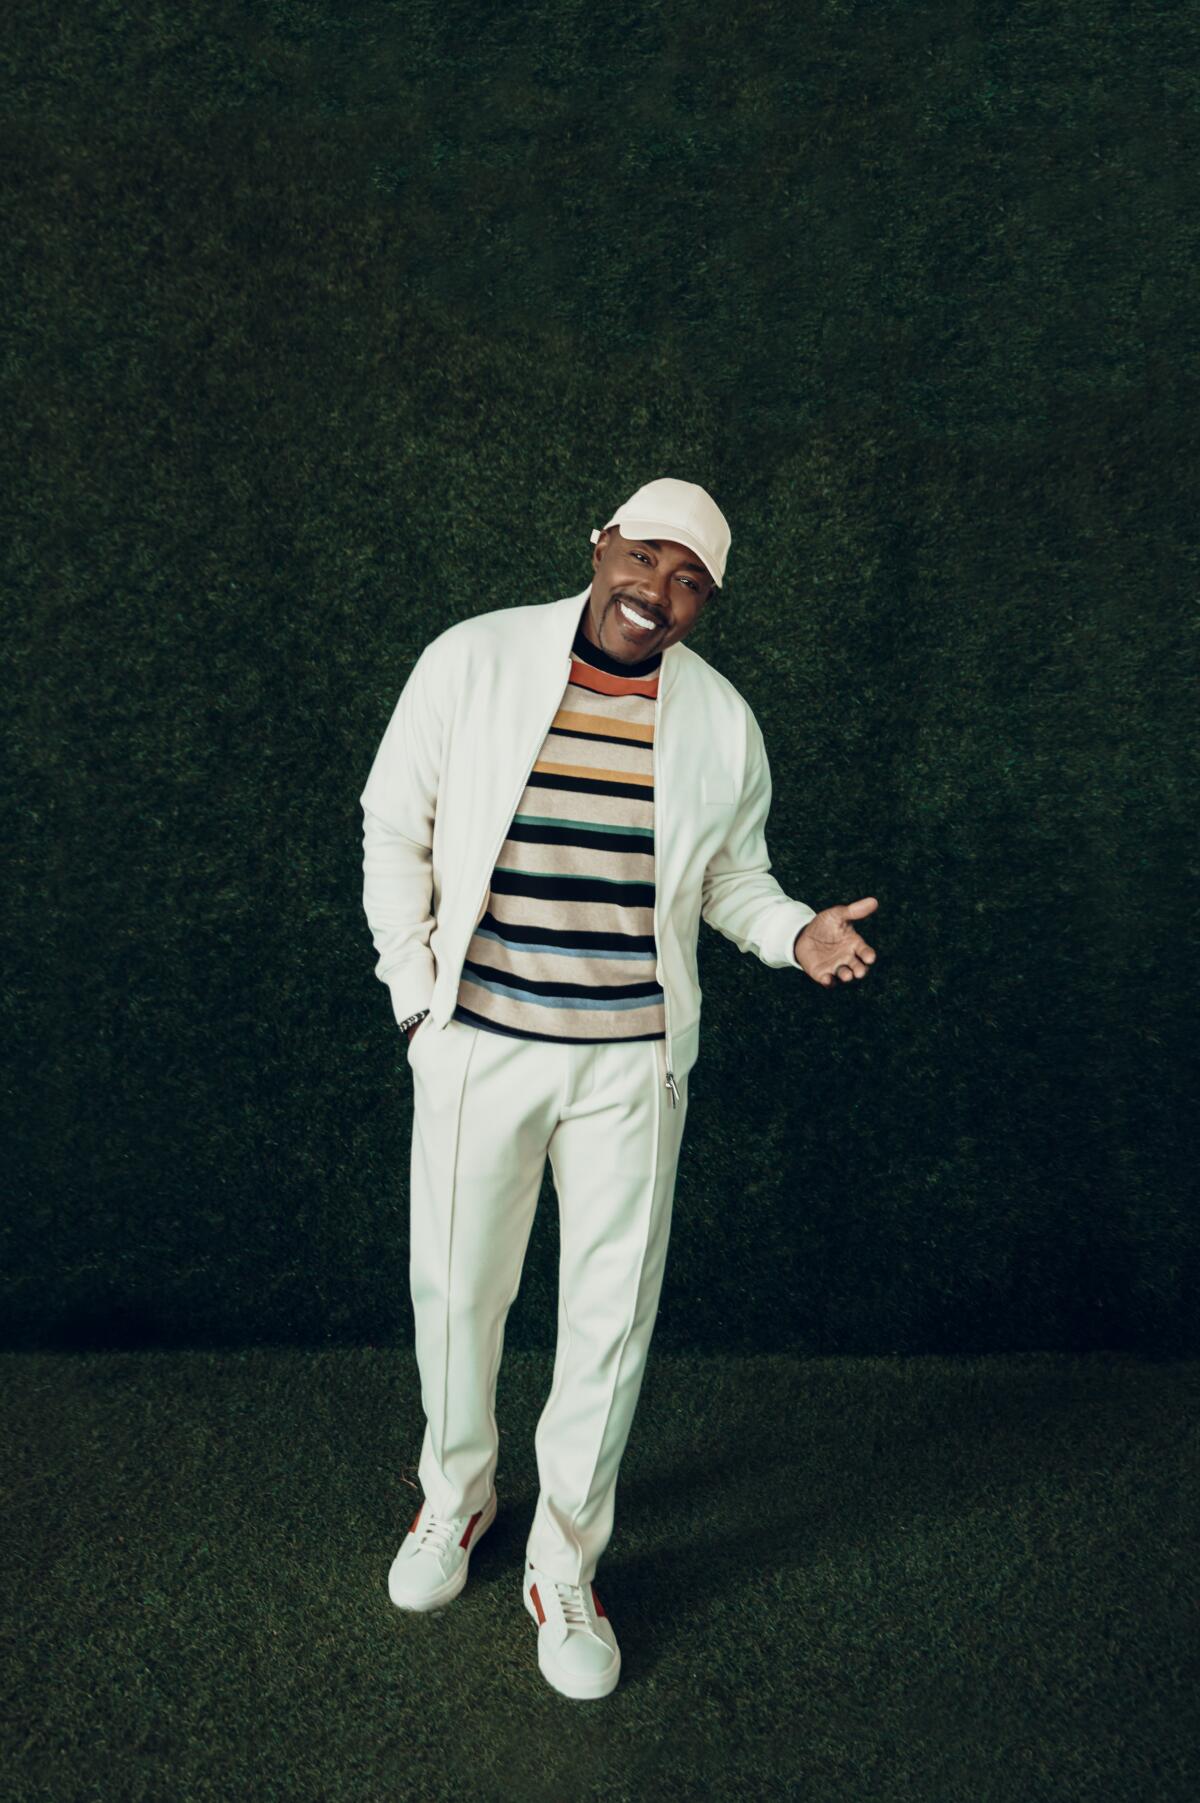 Producer Will Packer in white pants and white jacket over a striped shirt